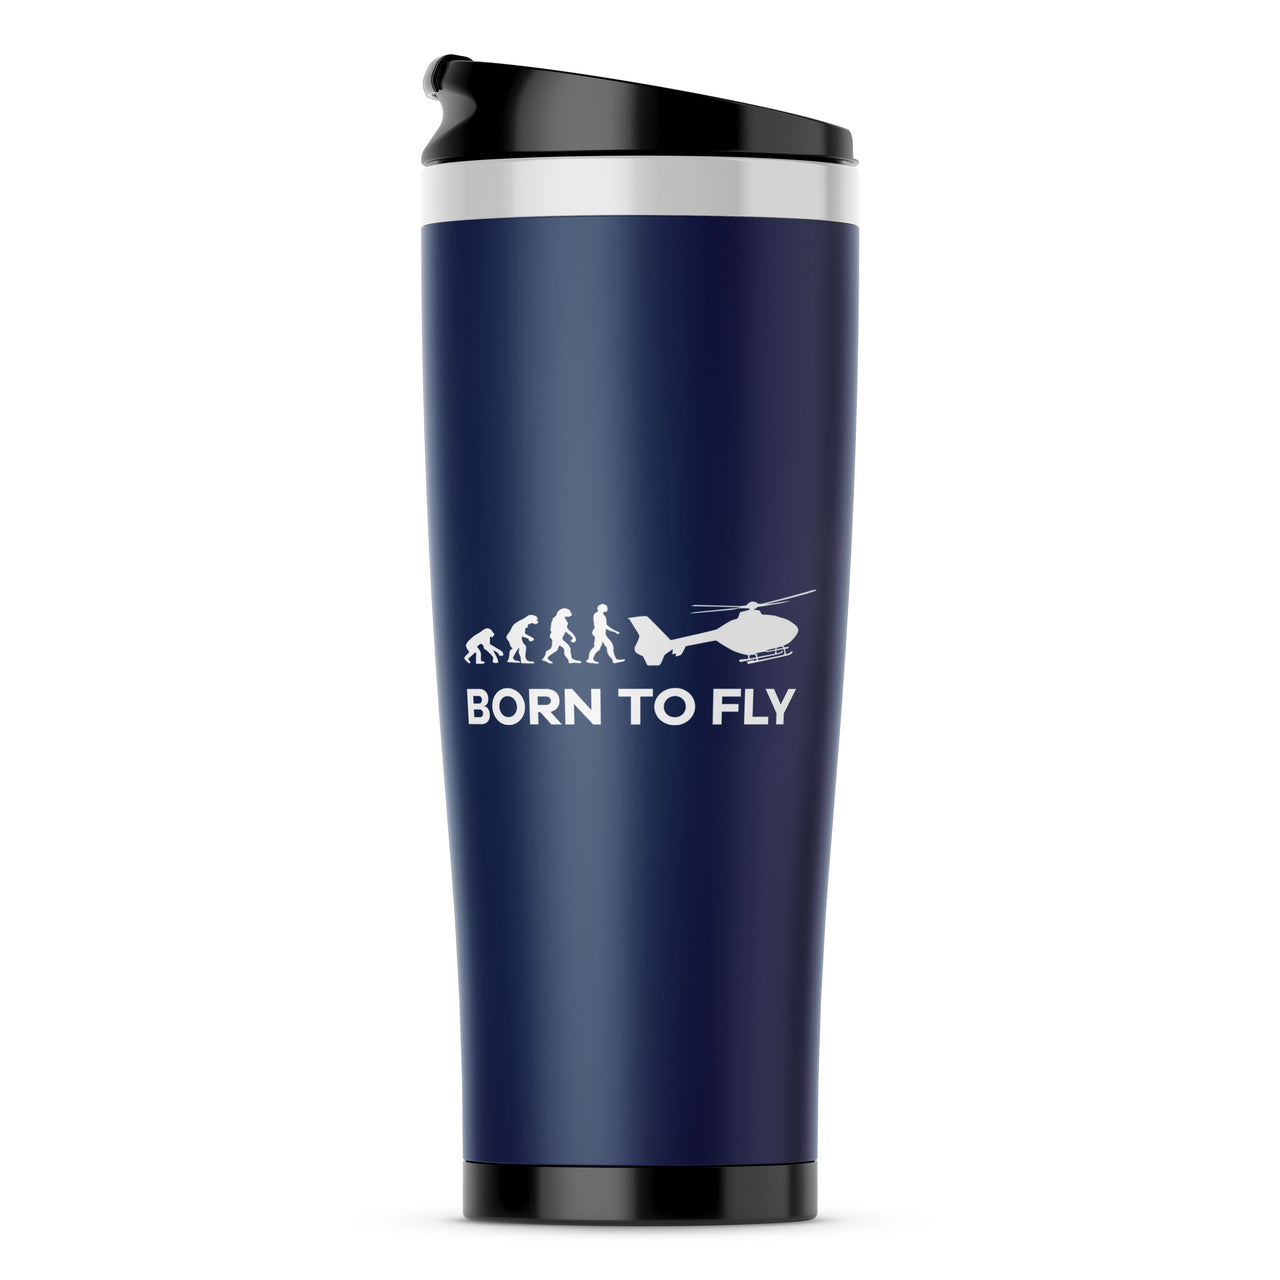 Born To Fly Helicopter Designed Travel Mugs